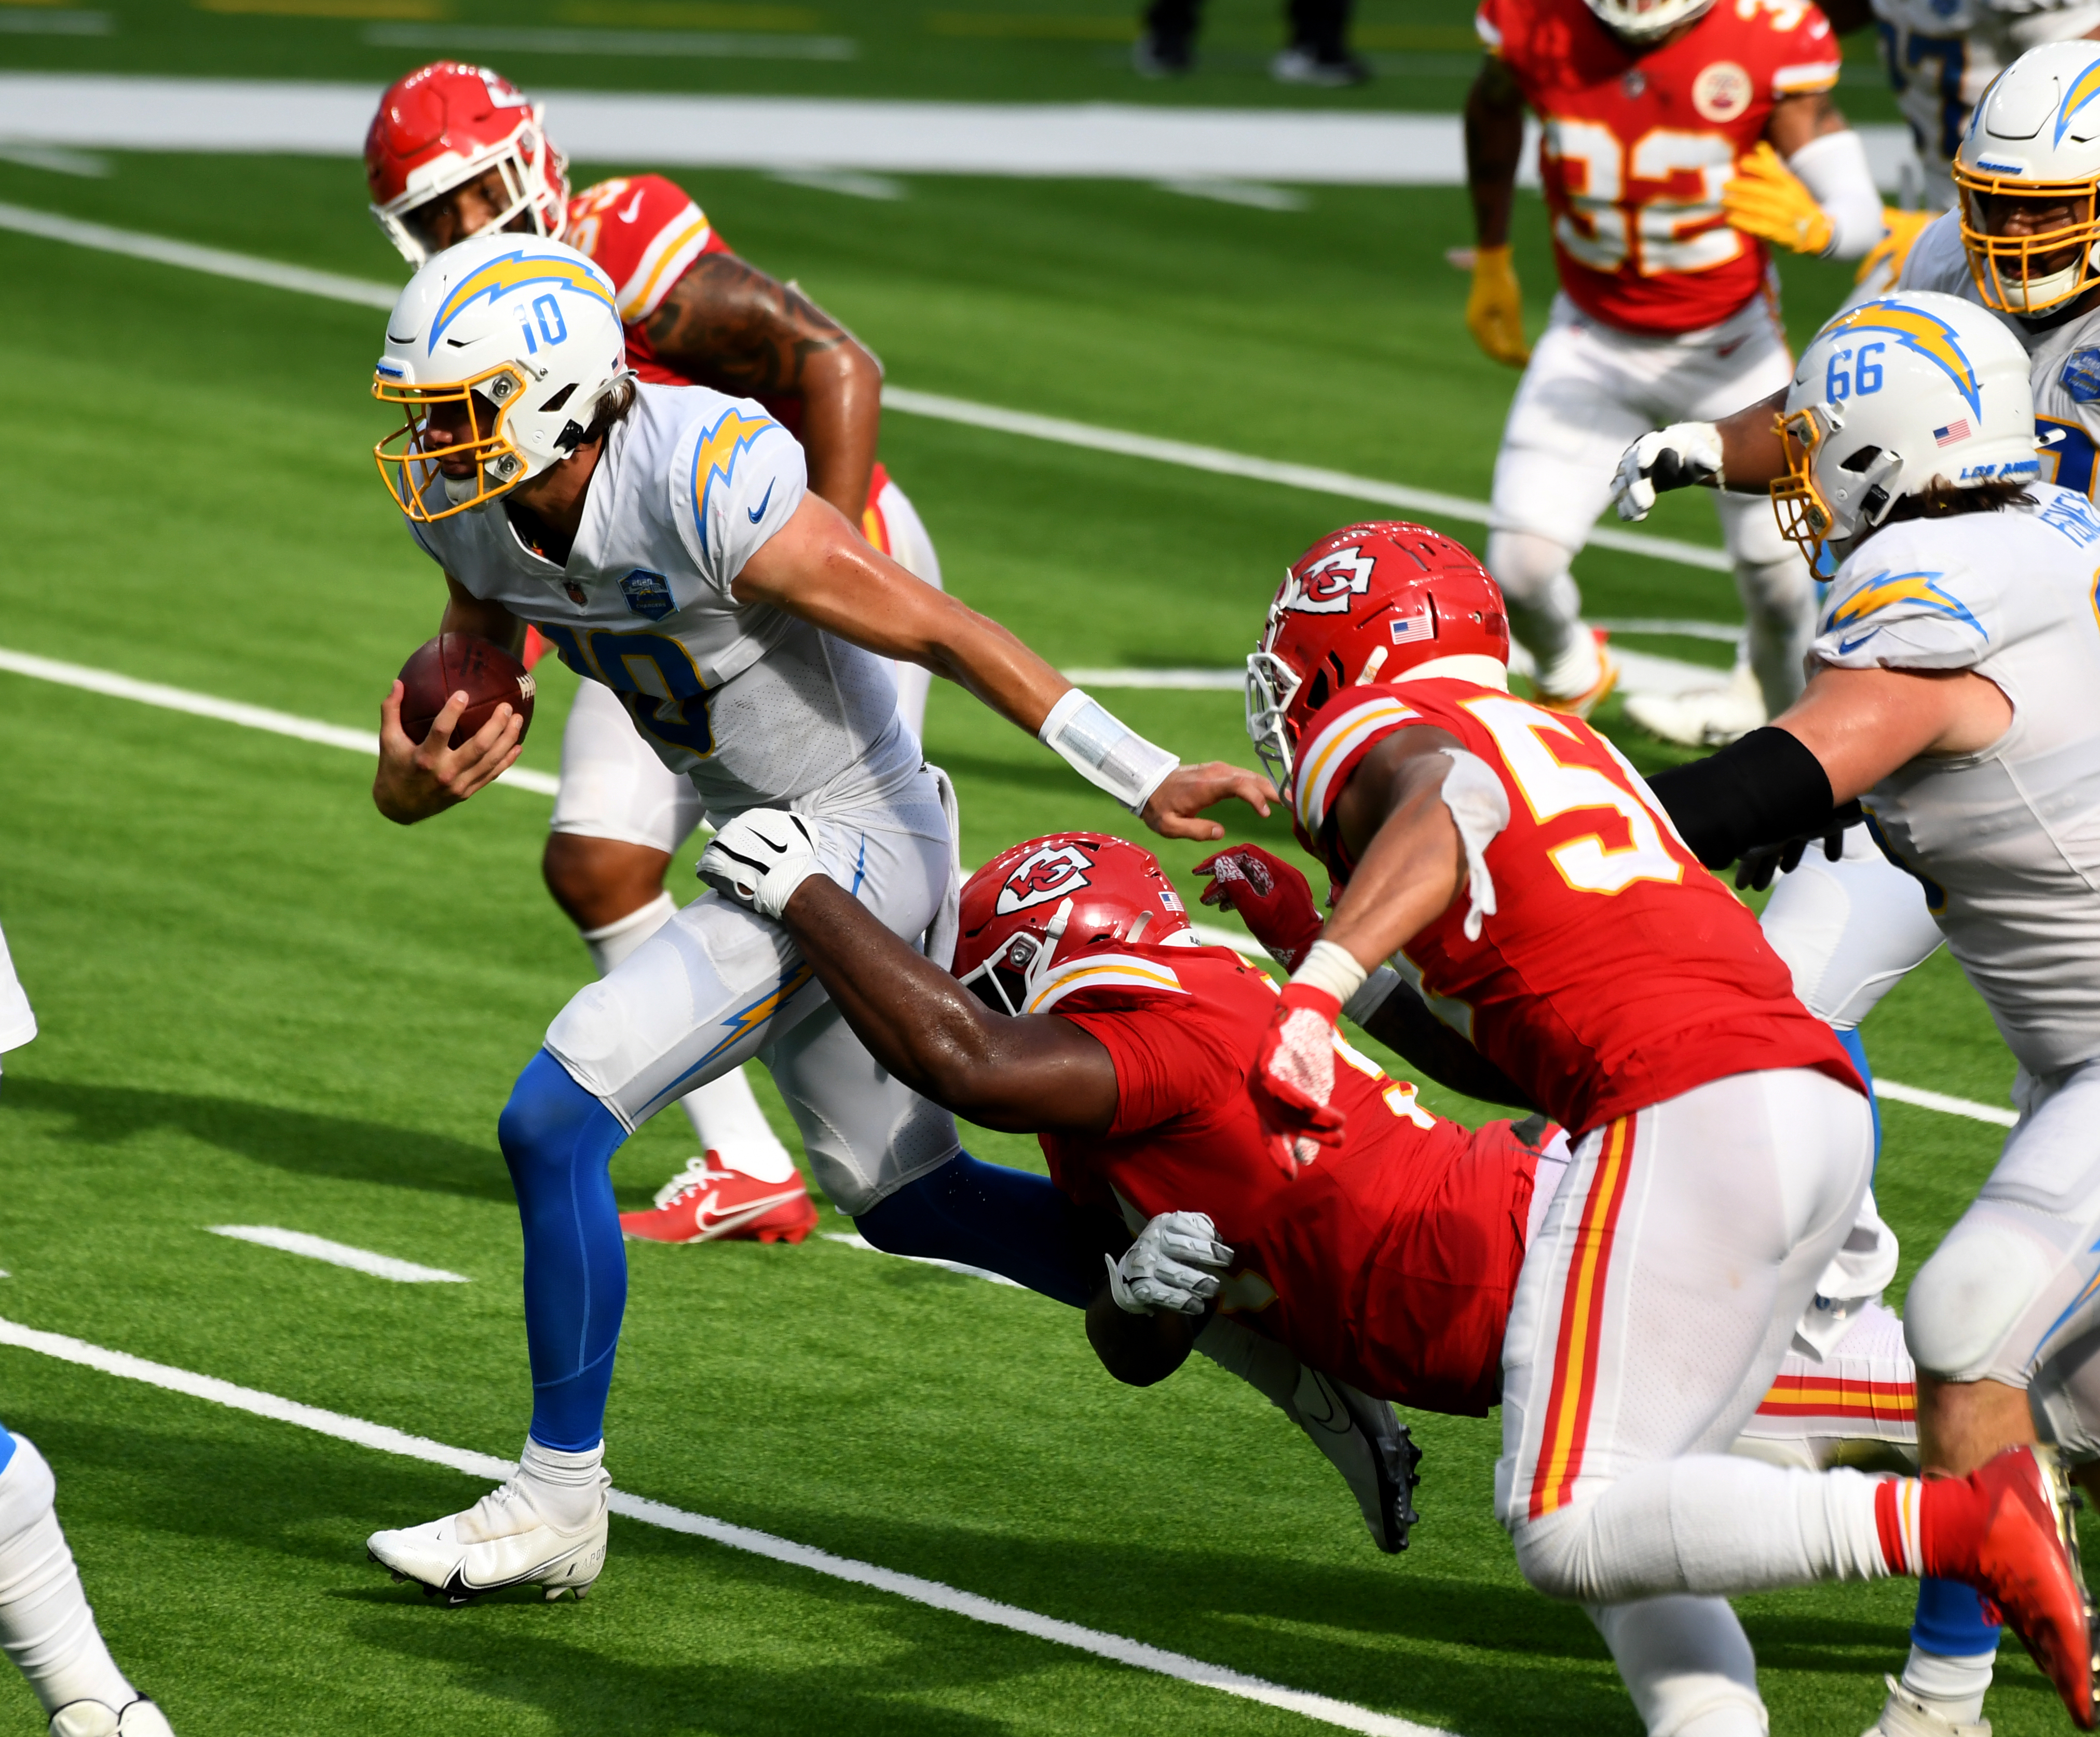 Kansas City Chiefs defeated the Los Angeles Chargers 23-20 in over time during an NFL game.